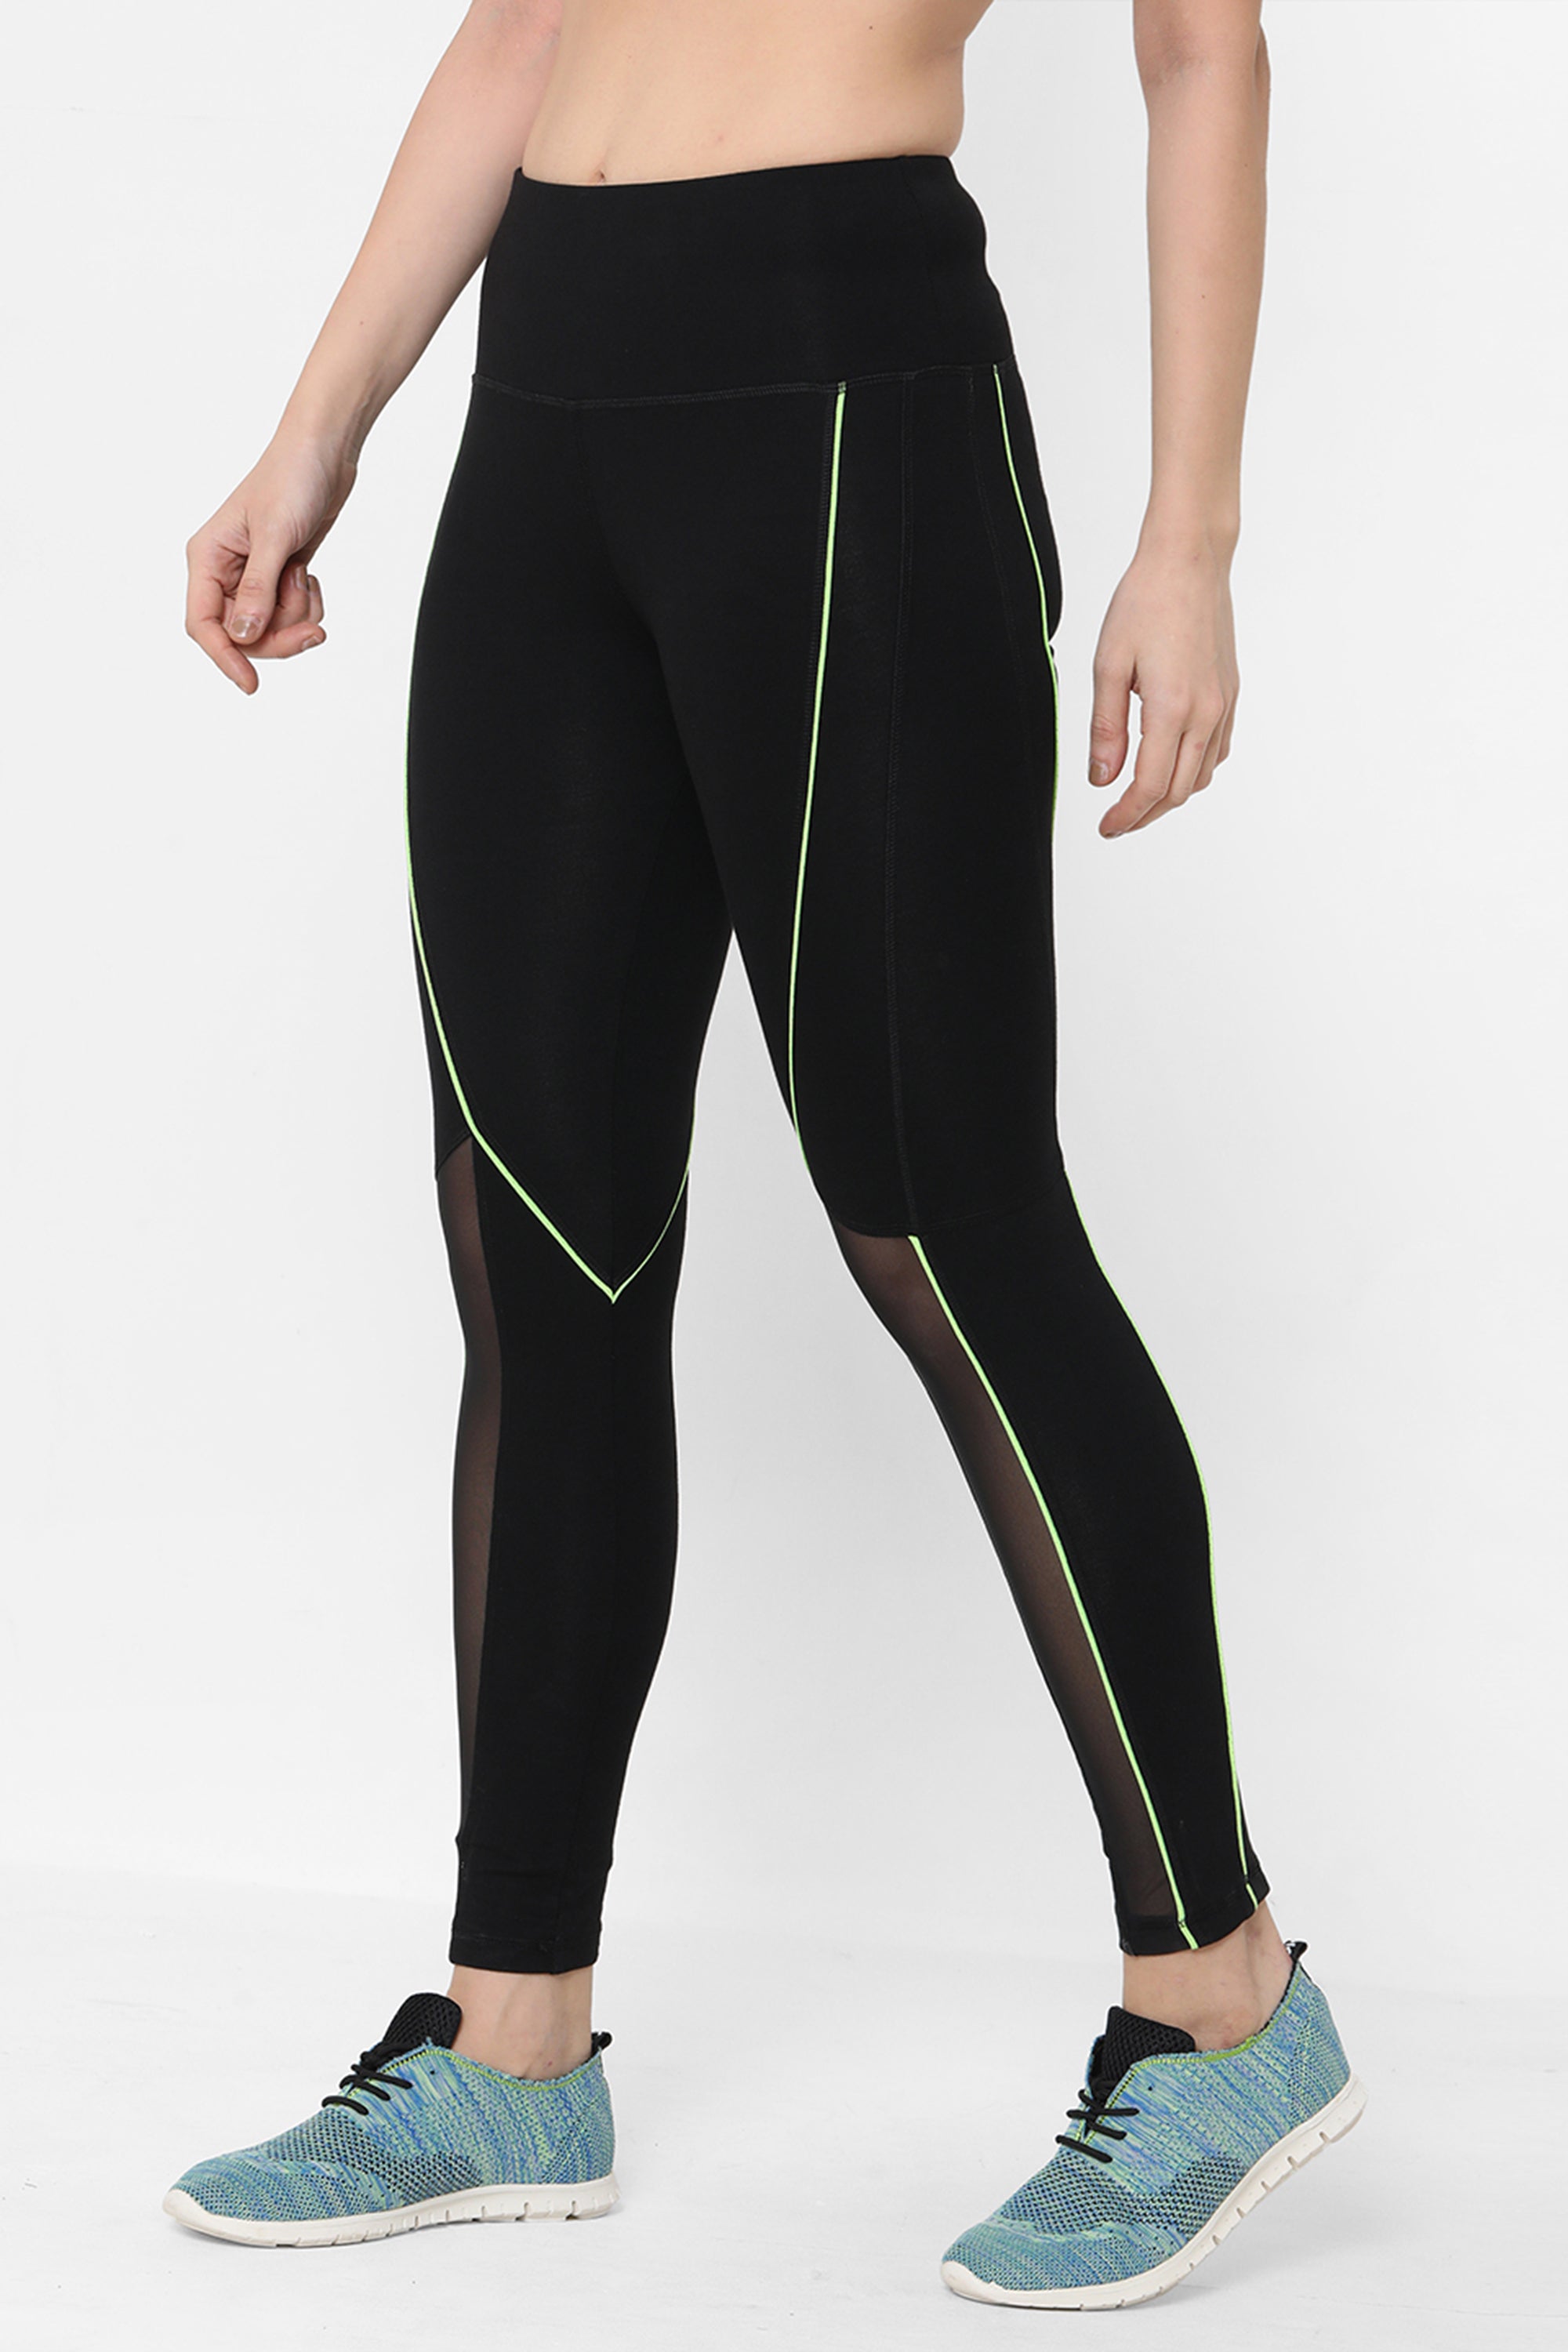 Leggings Spring 2019: Our Top Fun and Fab Picks - Exhale Lifestyle